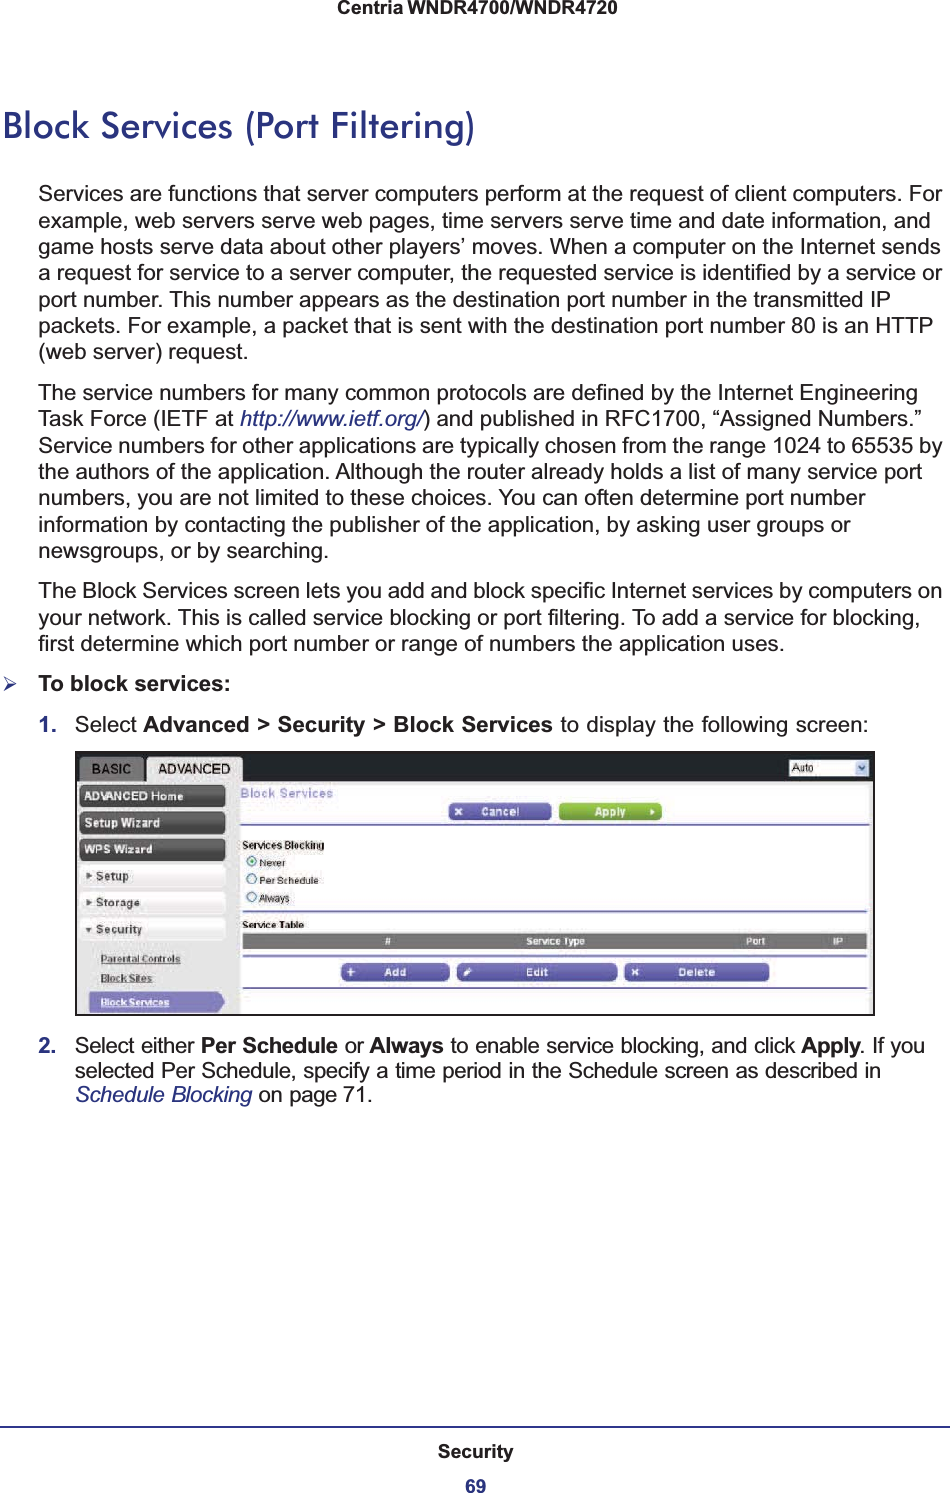 Security69 Centria WNDR4700/WNDR4720Block Services (Port Filtering)Services are functions that server computers perform at the request of client computers. For example, web servers serve web pages, time servers serve time and date information, and game hosts serve data about other players’ moves. When a computer on the Internet sends a request for service to a server computer, the requested service is identified by a service or port number. This number appears as the destination port number in the transmitted IP packets. For example, a packet that is sent with the destination port number 80 is an HTTP (web server) request. The service numbers for many common protocols are defined by the Internet Engineering Task Force (IETF at http://www.ietf.org/) and published in RFC1700, “Assigned Numbers.” Service numbers for other applications are typically chosen from the range 1024 to 65535 by the authors of the application. Although the router already holds a list of many service port numbers, you are not limited to these choices. You can often determine port number information by contacting the publisher of the application, by asking user groups or newsgroups, or by searching.The Block Services screen lets you add and block specific Internet services by computers on your network. This is called service blocking or port filtering. To add a service for blocking, first determine which port number or range of numbers the application uses. ¾To block services:1. Select Advanced &gt; Security &gt; Block Services to display the following screen:2. Select either Per Schedule or Always to enable service blocking, and click Apply. If you selected Per Schedule, specify a time period in the Schedule screen as described in Schedule Blocking on page 71.